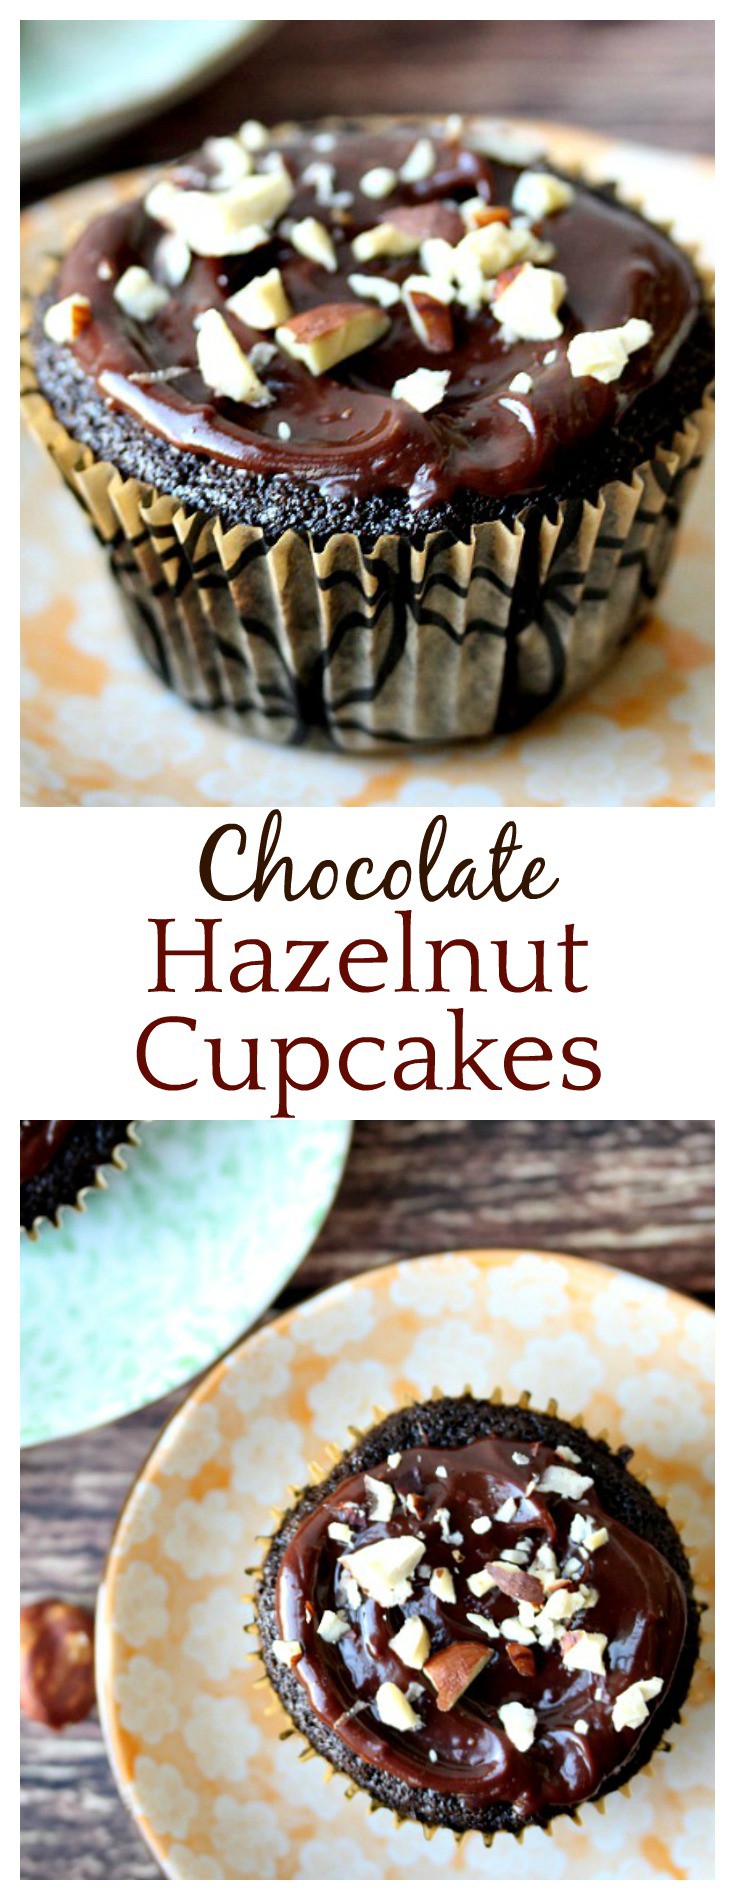 If you love Nutella, you will love this Chocolate Hazelnut Cupcakes Recipe! With hazelnut extract in a classic chocolate cupcake recipe and a chocolate ganache icing topping them off, every bite is simply amazing!